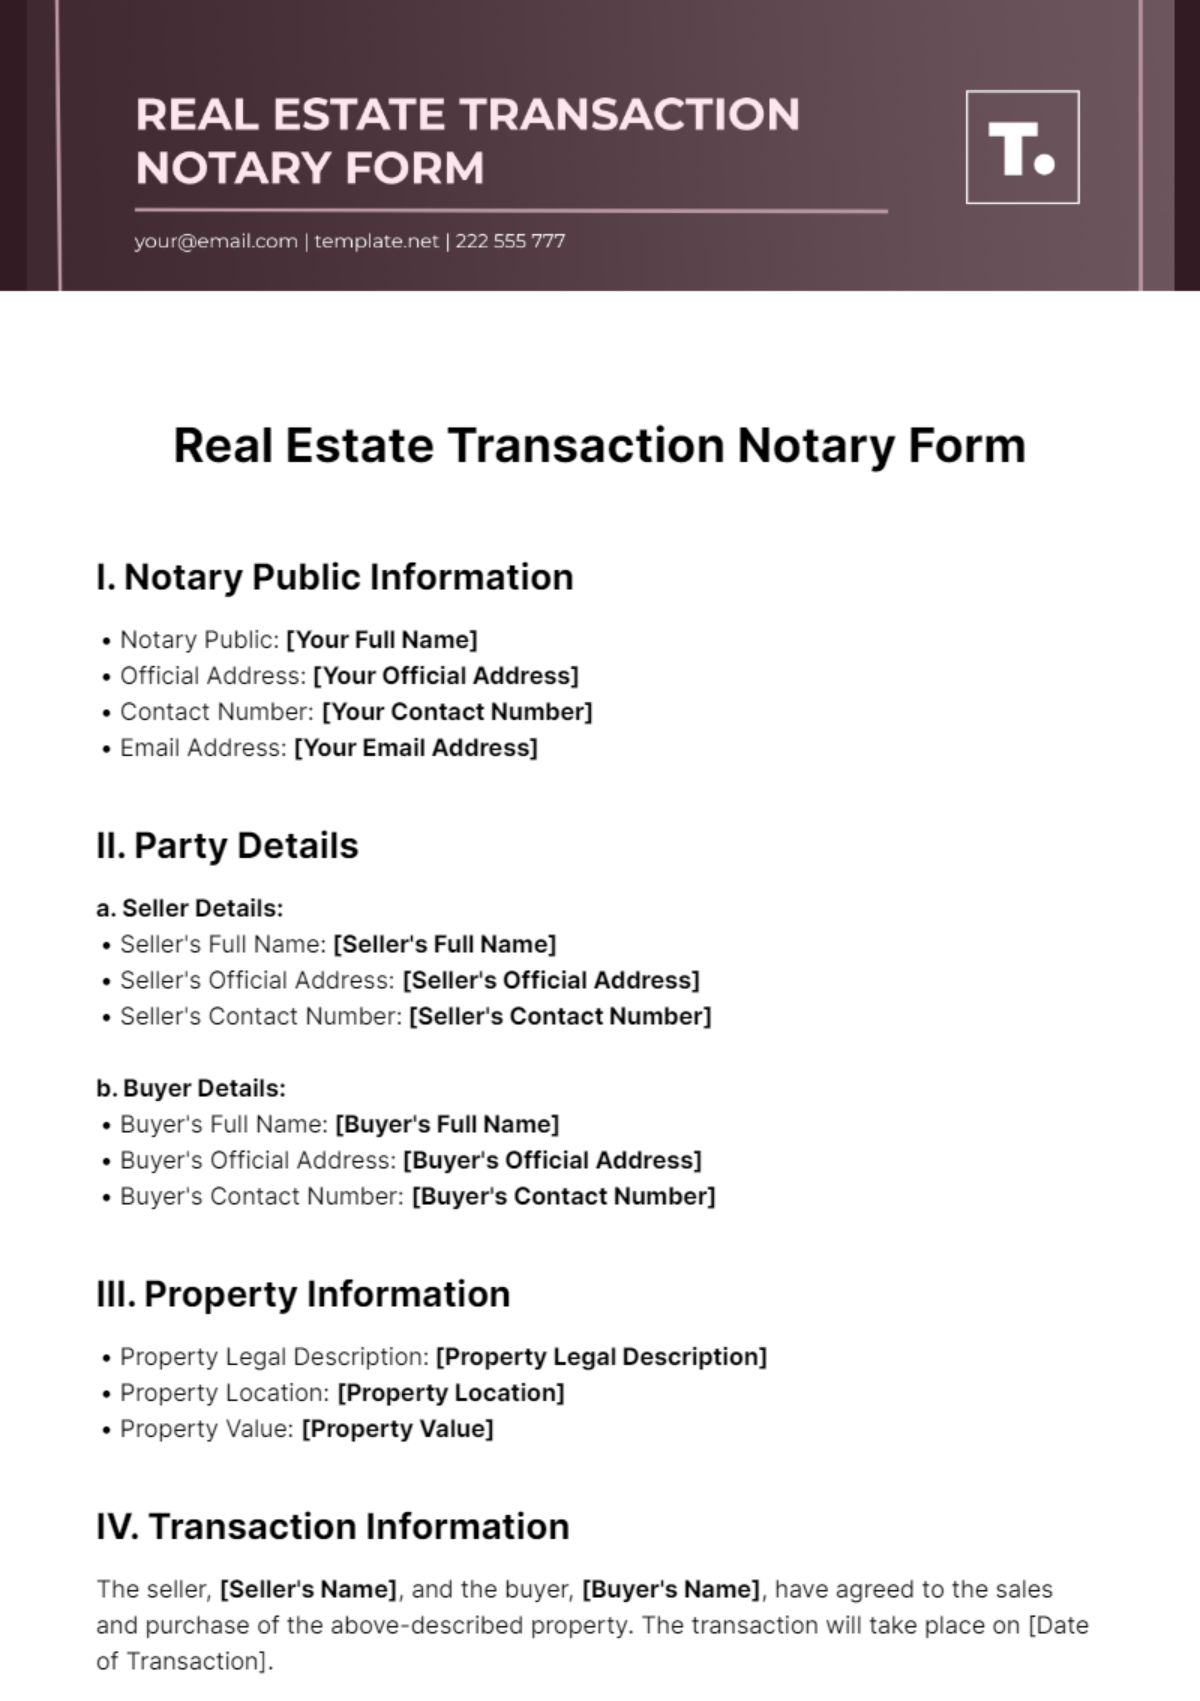 Real Estate Transaction Notary Form Template